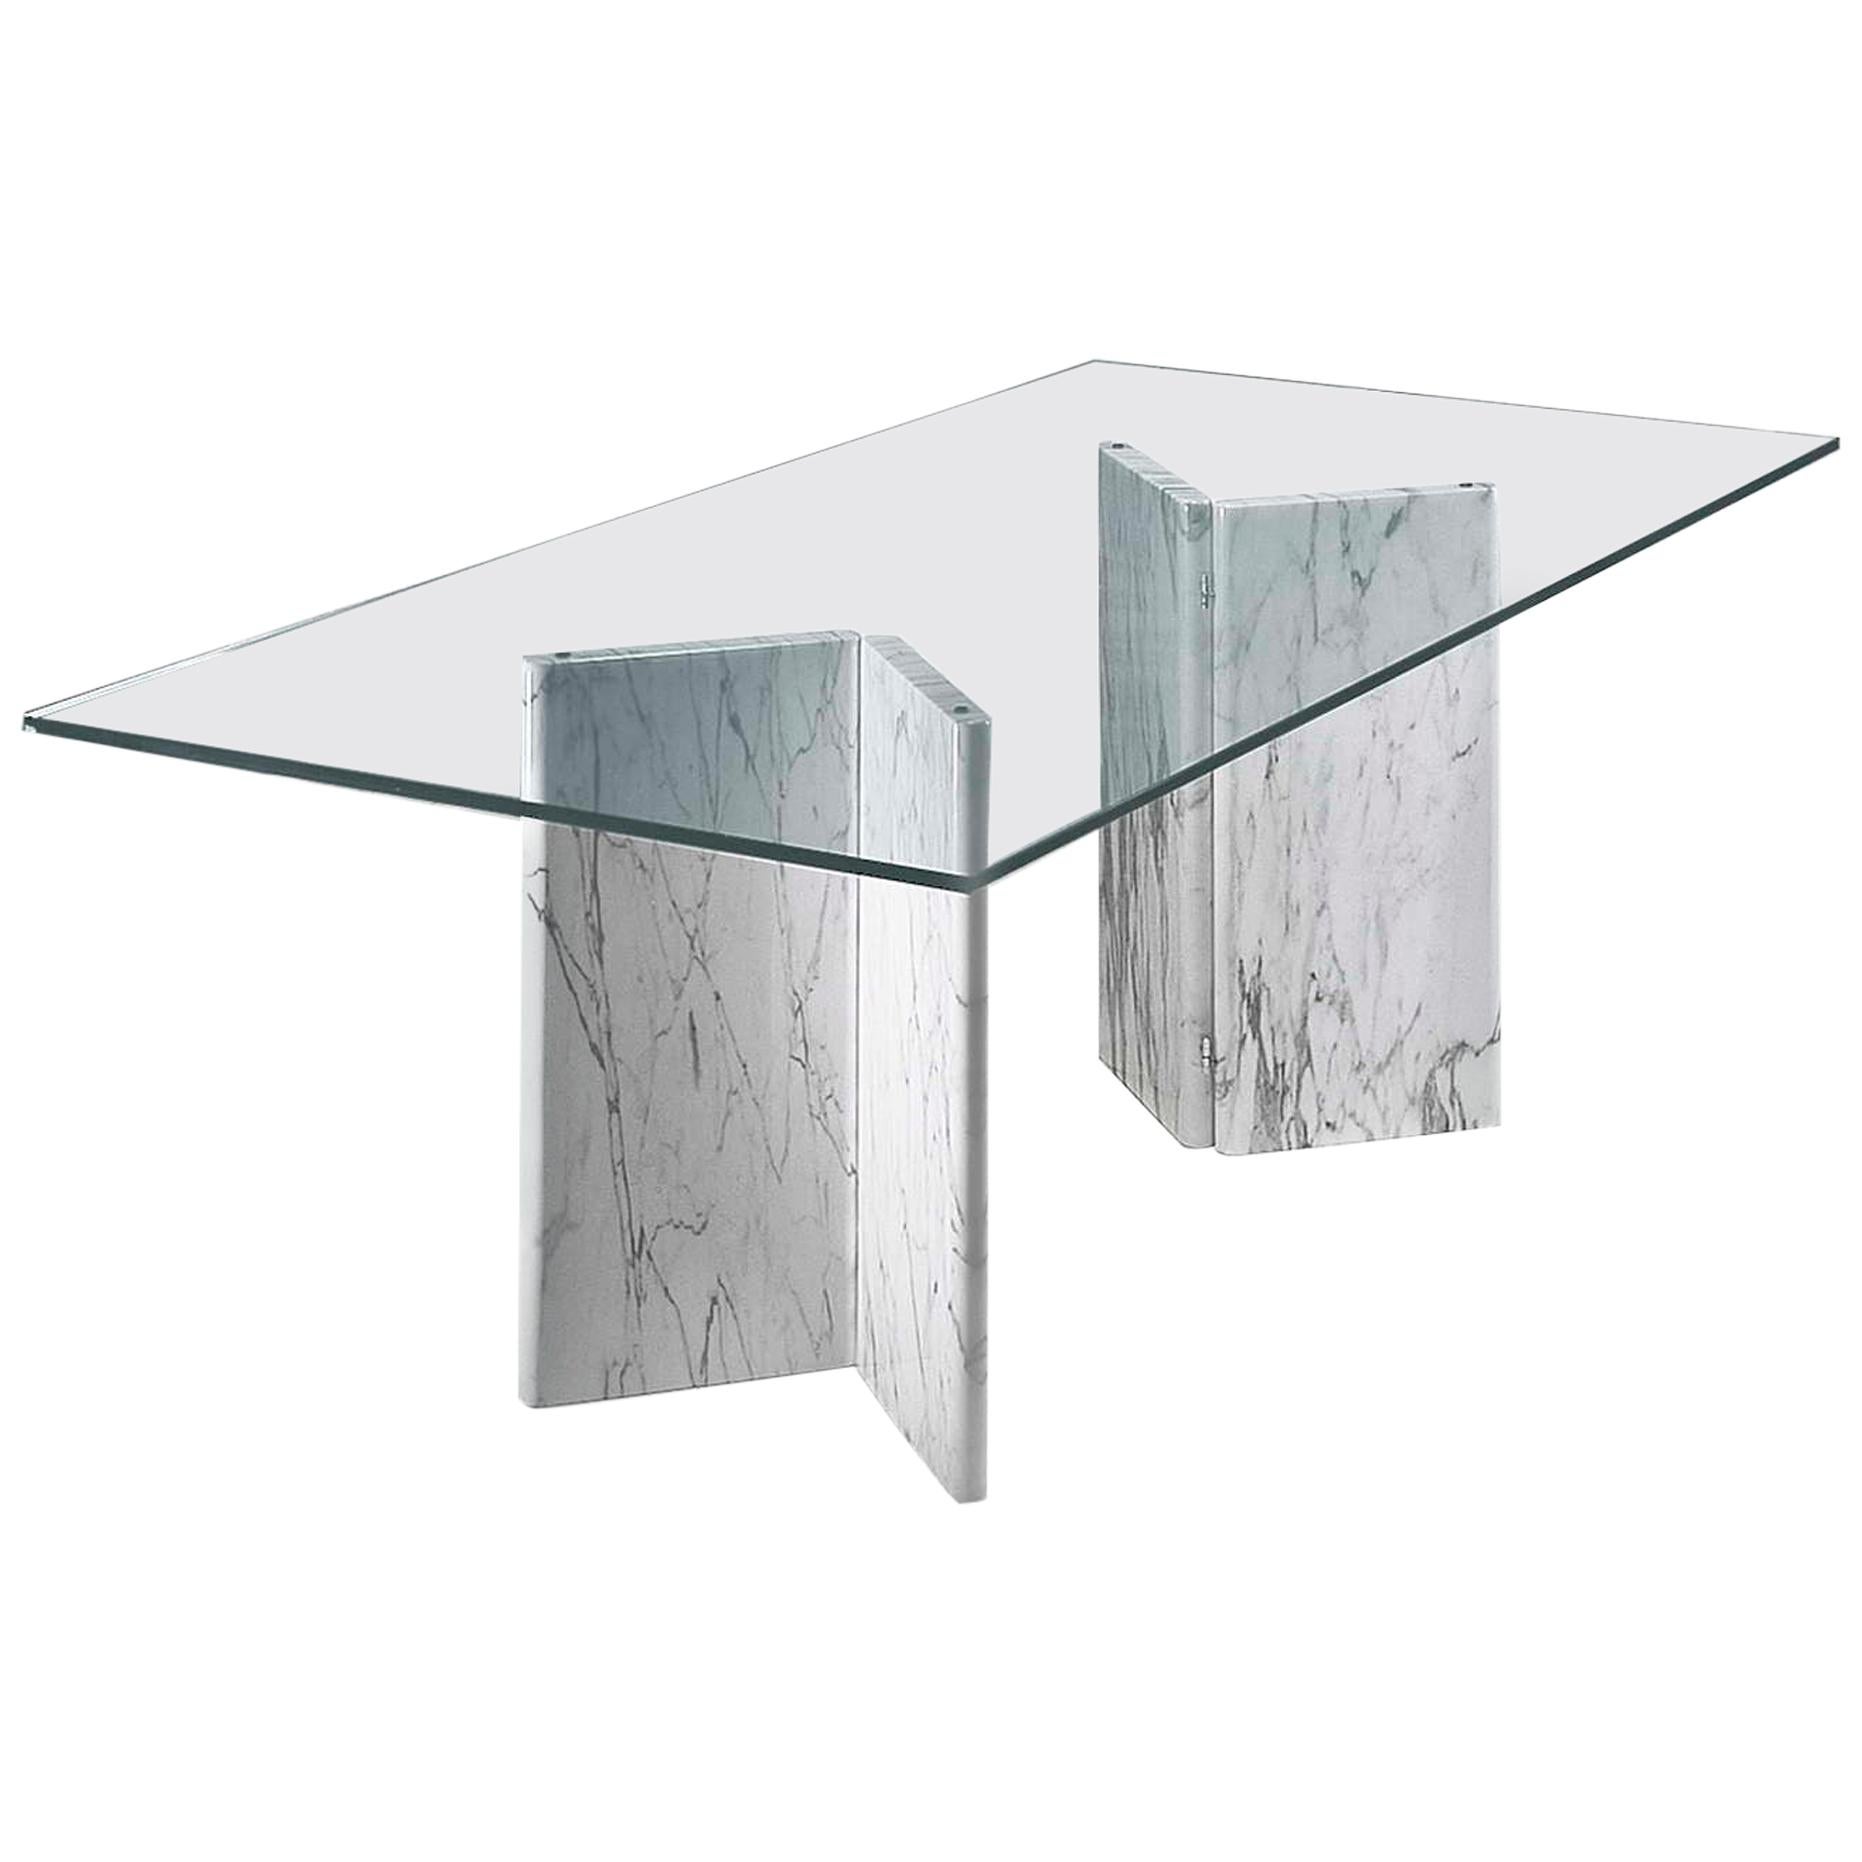 By Giusti/DiRosa Living Room Table BEDIZZANO White Marble Legs and Crystal Plane